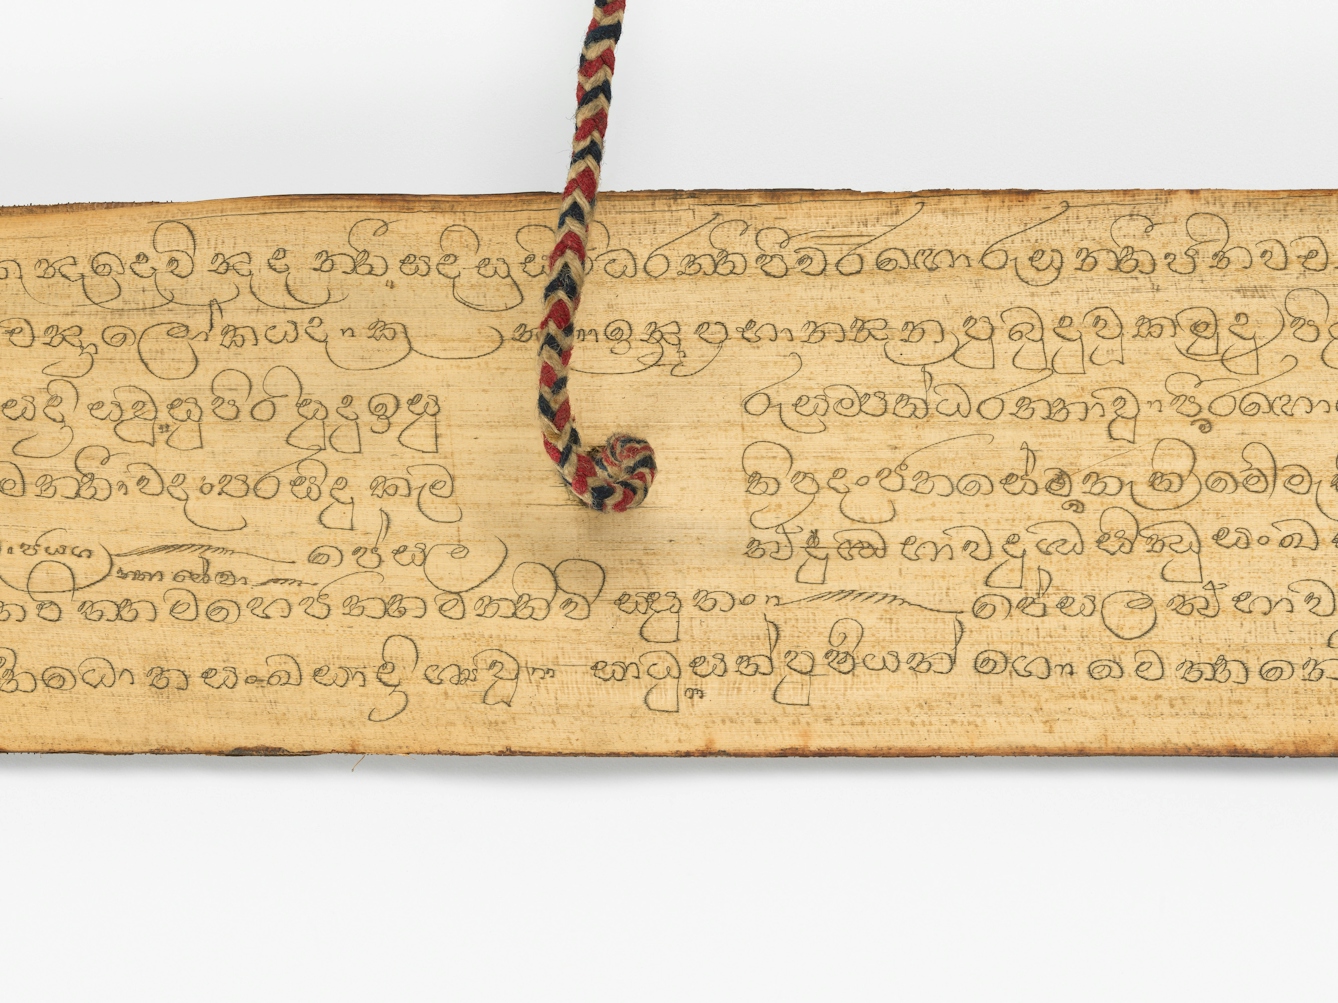 Detail of a page from a palm leaf manuscript with inscribed text in Sinhala. A red, whilte and blue string emerges from a hole in the centre of the leaf, holding the manuscript together.